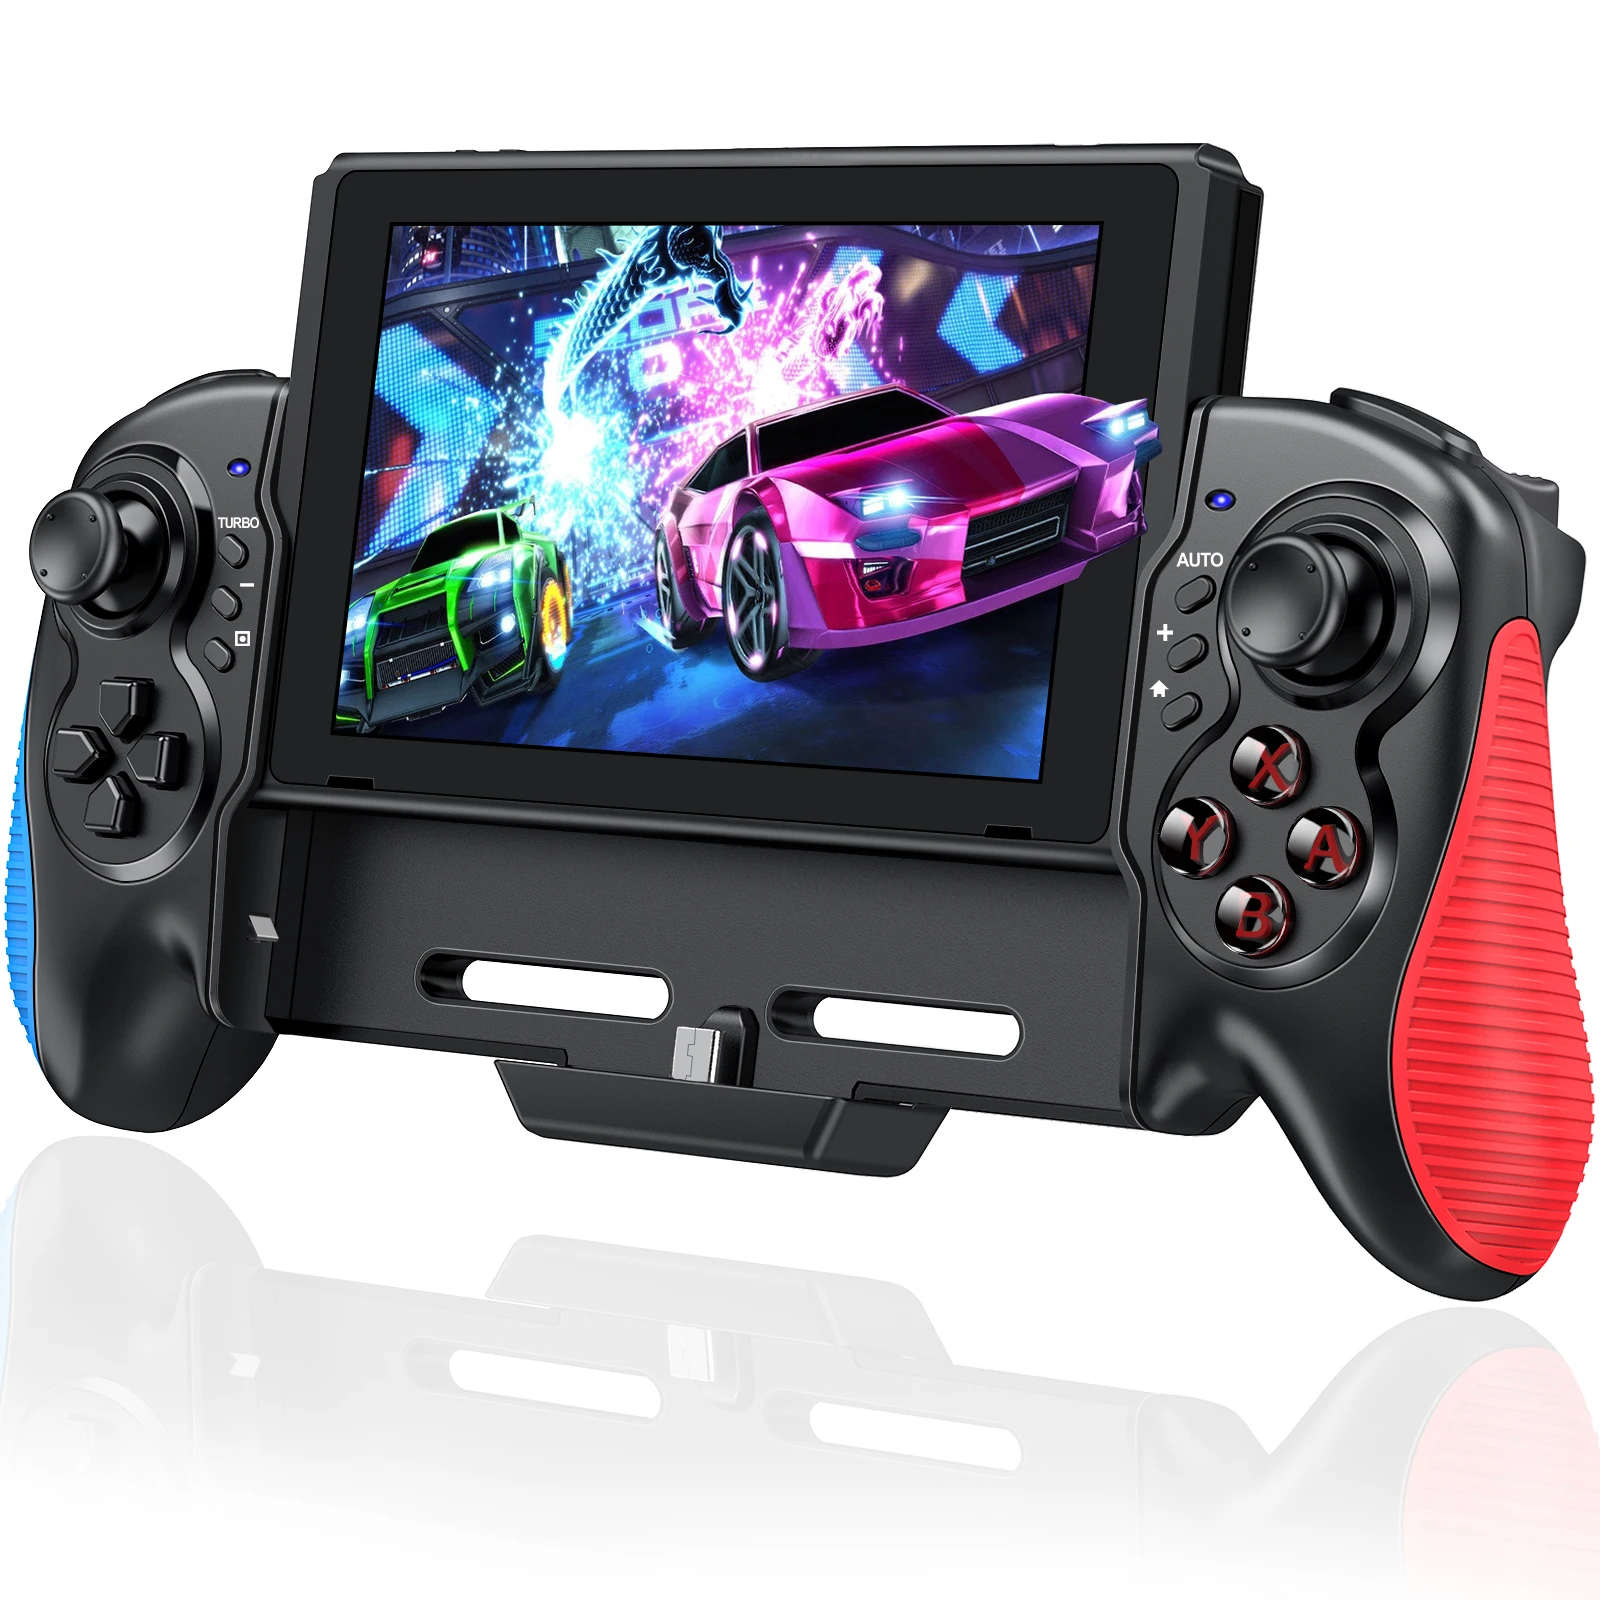 

Controller Handheld Double Motor Vibration Built-in 6-Axis Gyro Joystick For Switch Accessories Free shipping Rushed Recommend